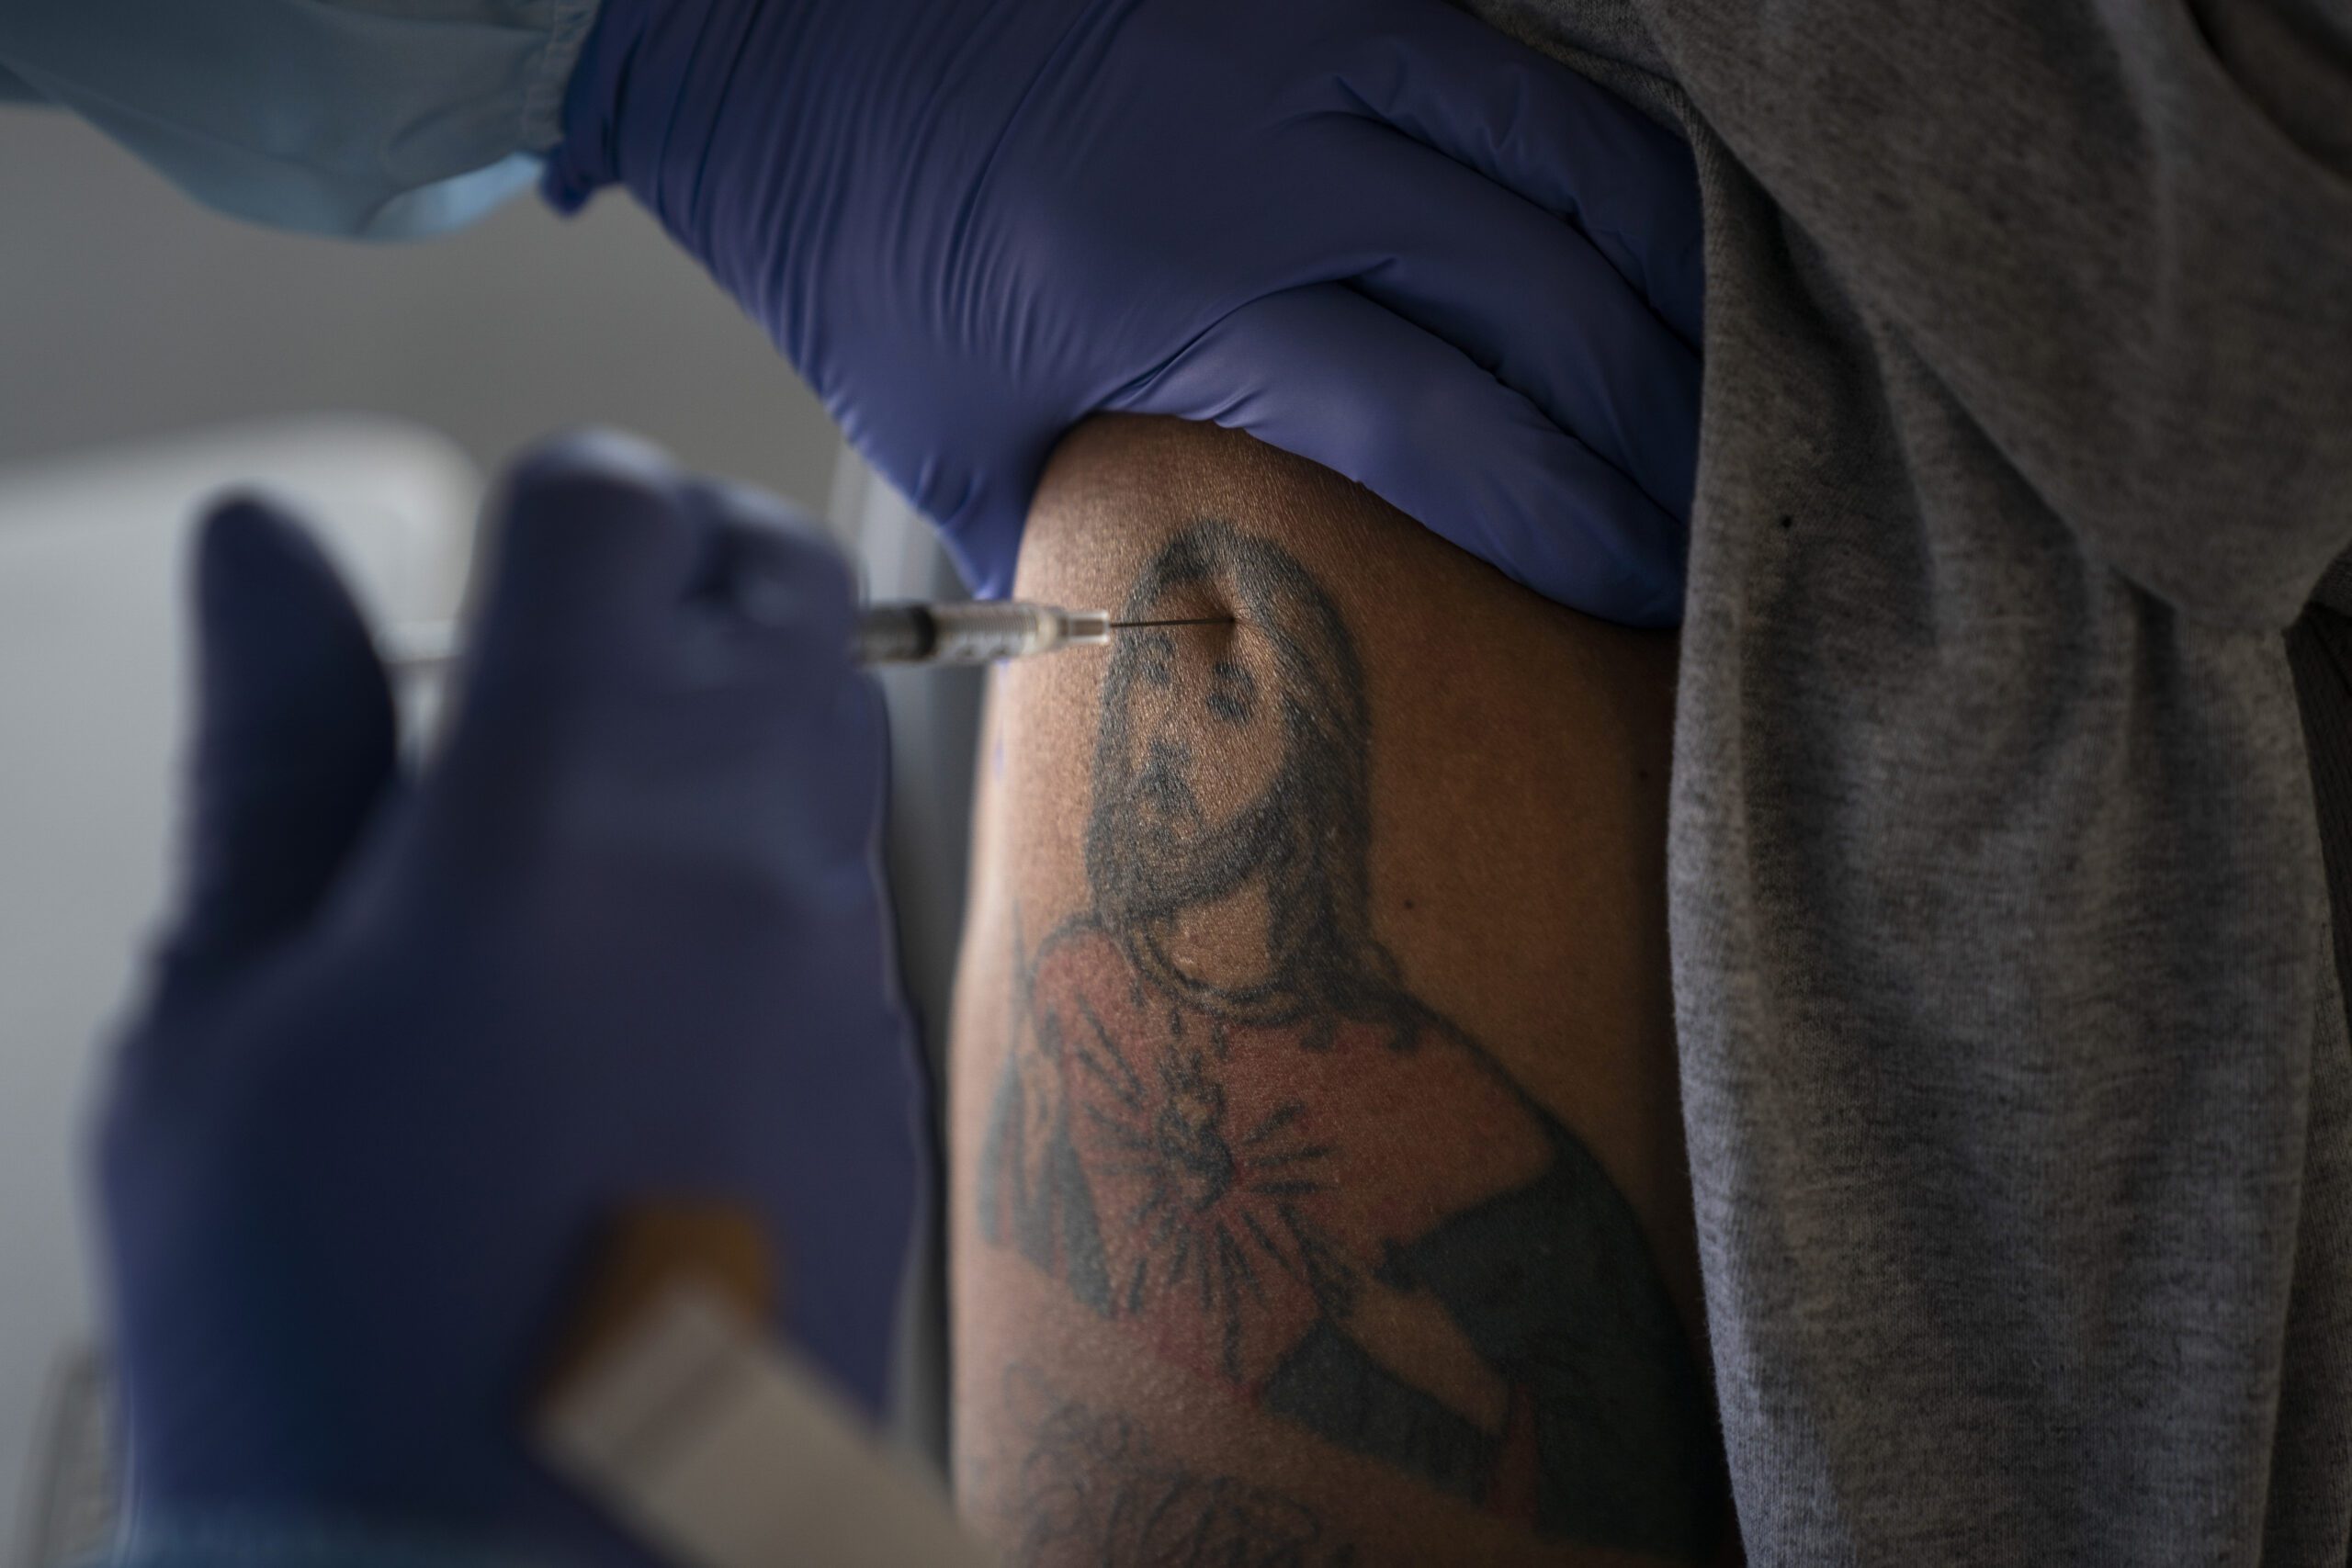 A farm worker receives a dose of a COVID-19 vaccine on his arm his arm bearing a tattoo depicting Jesus.